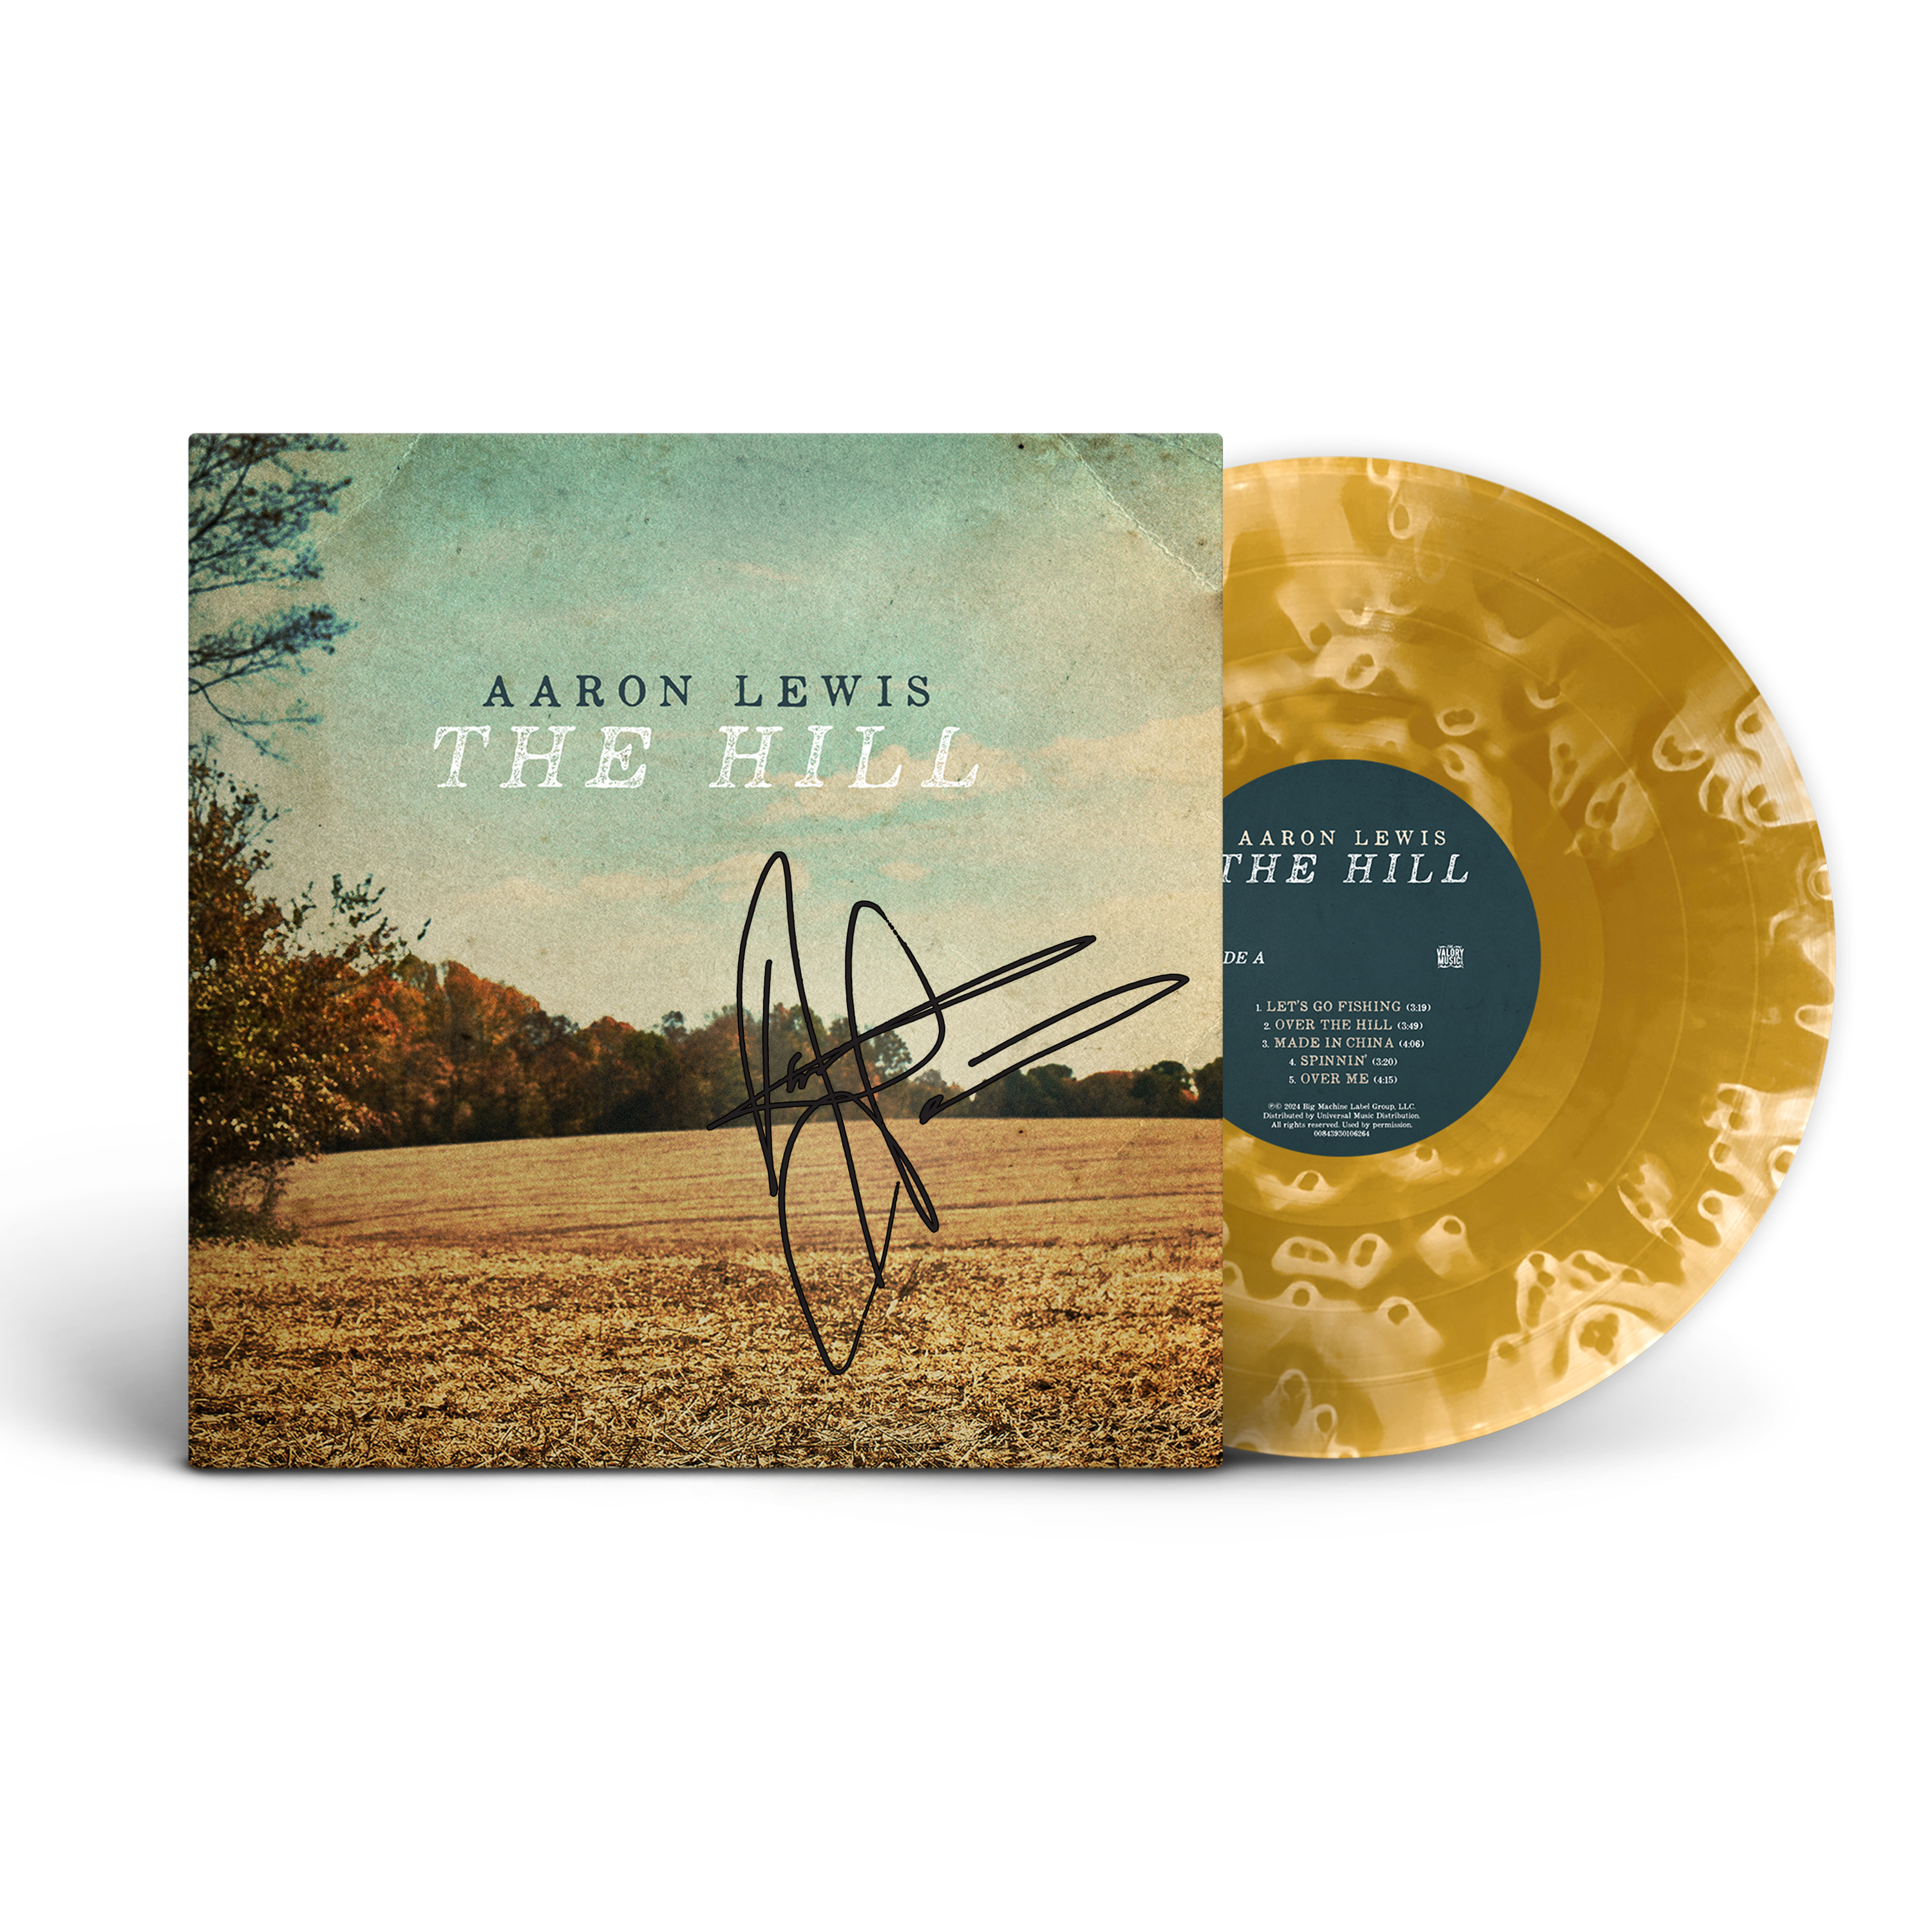 Aaron Lewis - The Hill Exclusive Signed Vinyl (Ghostly Translucent Tan & Clear)